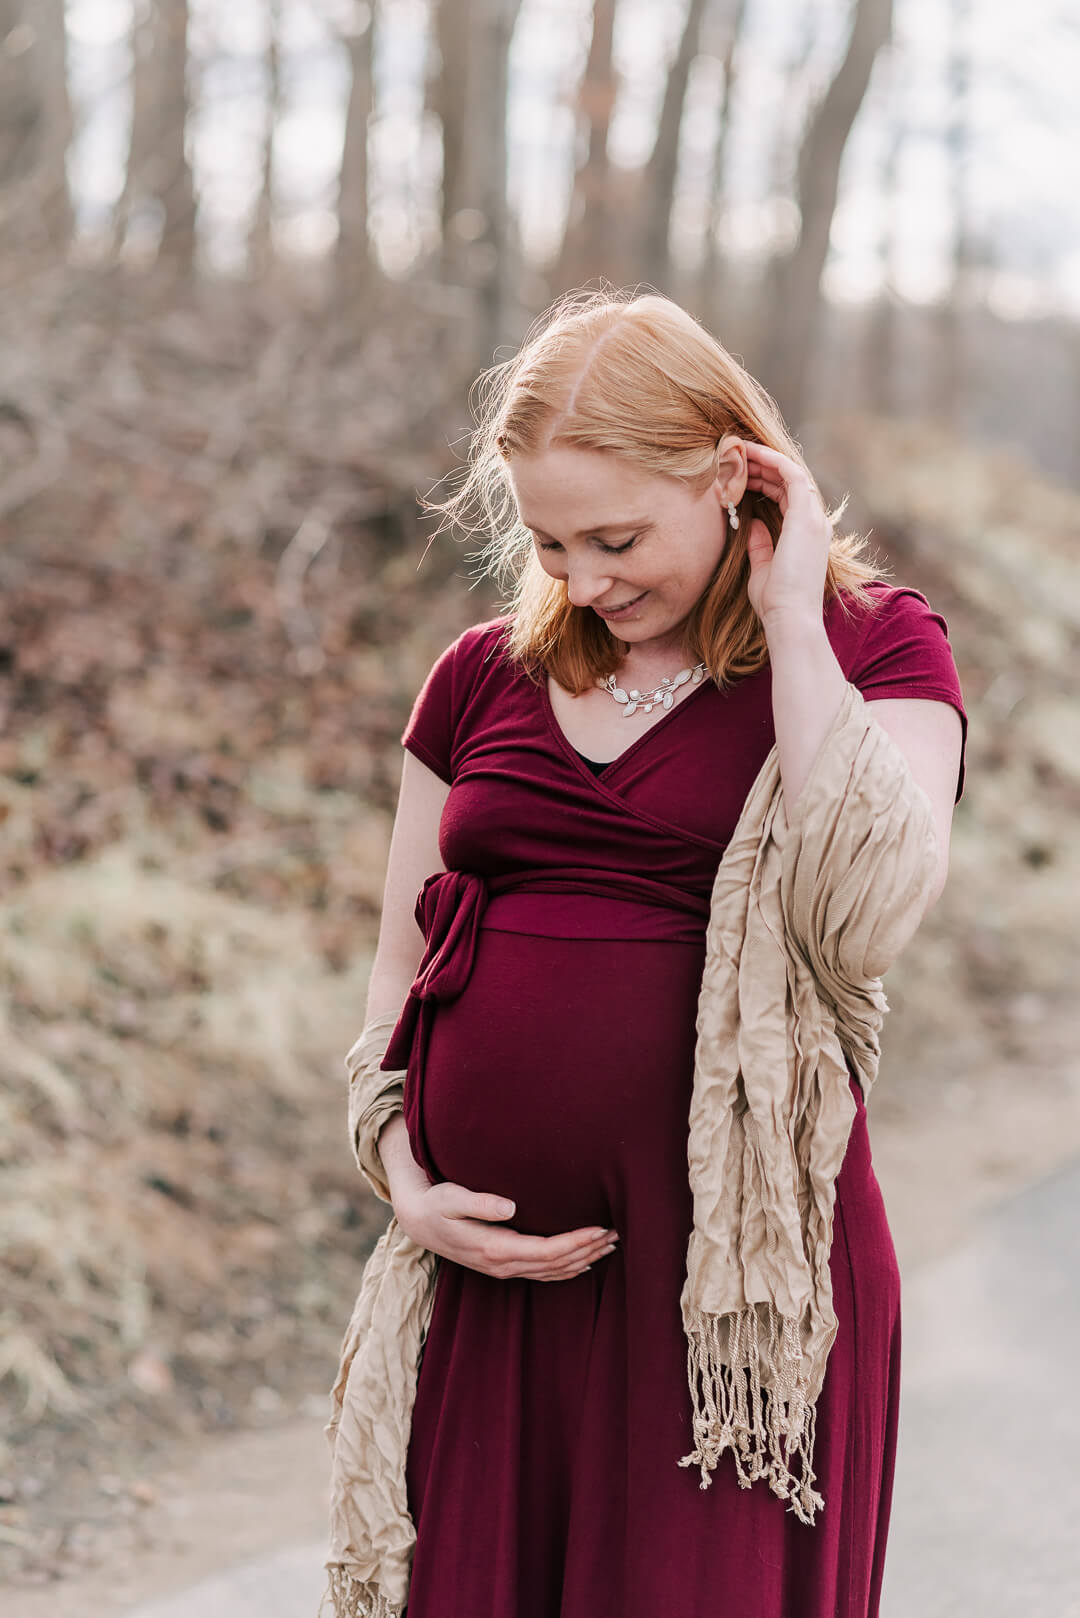 A mother to be smiles down to her bump while standing in a park path in a red maternity gown